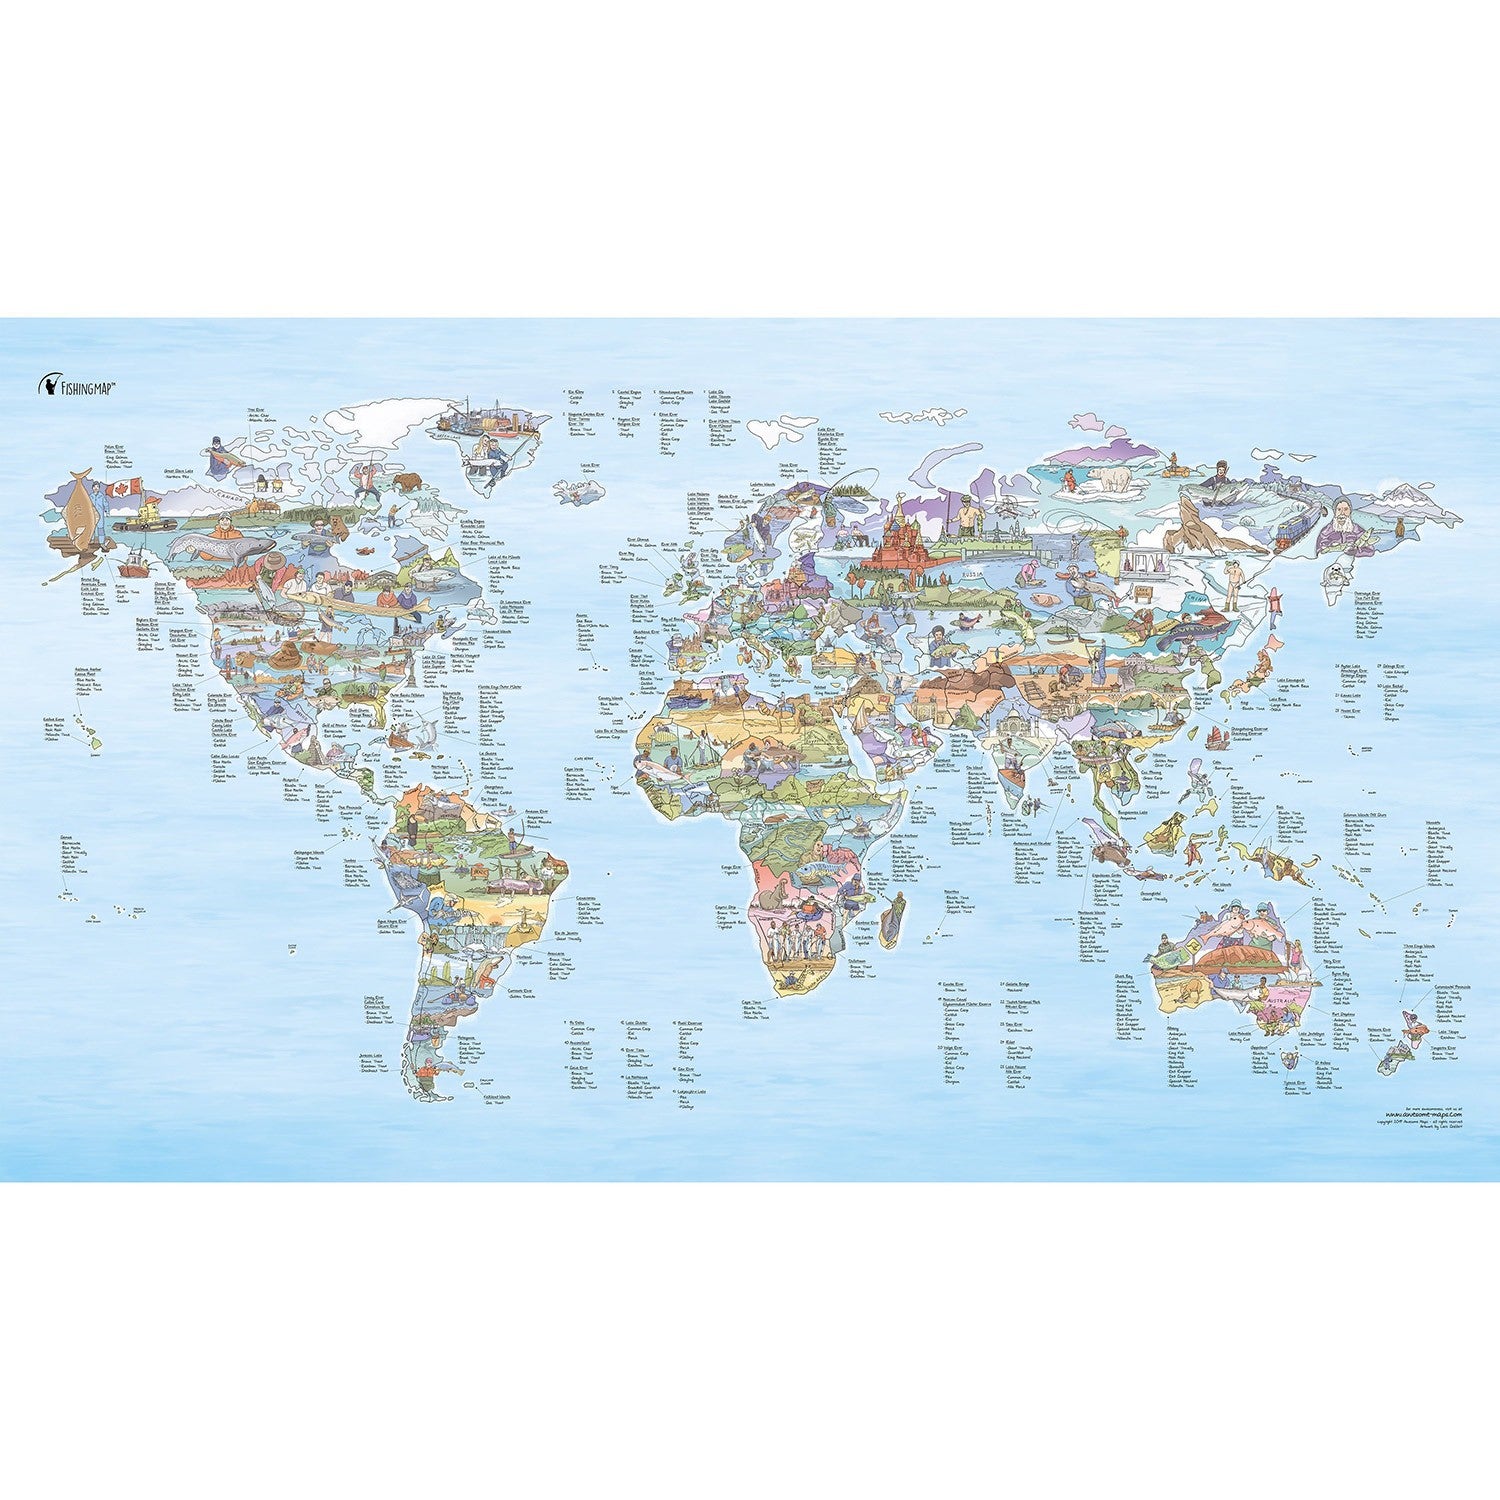 Awesome Maps - World Map Poster - Fishing Map Re-writable